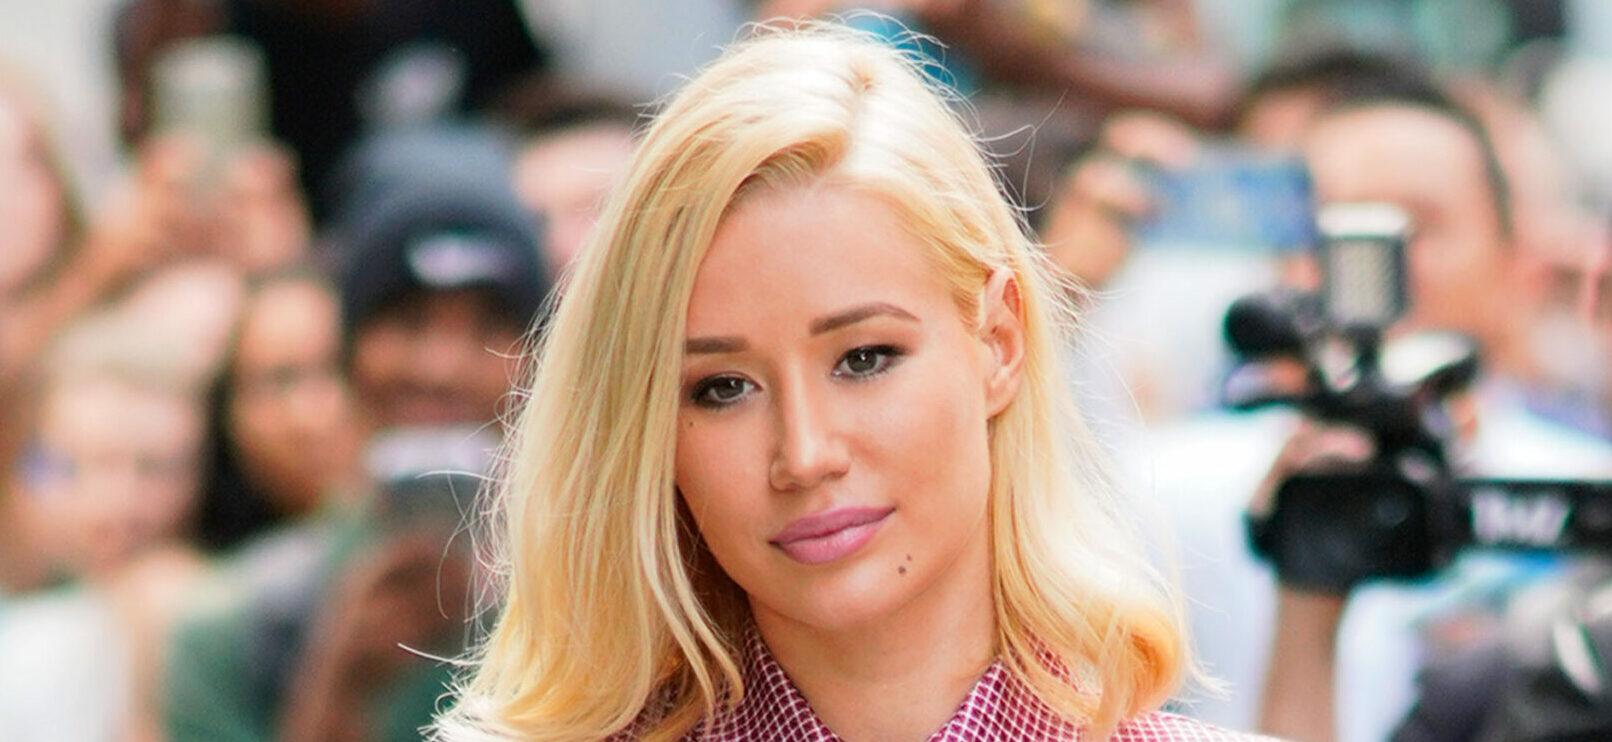 Iggy Azalea Is Not Sorry For Deciding To ‘Commodify’ Her Body On OnlyFans